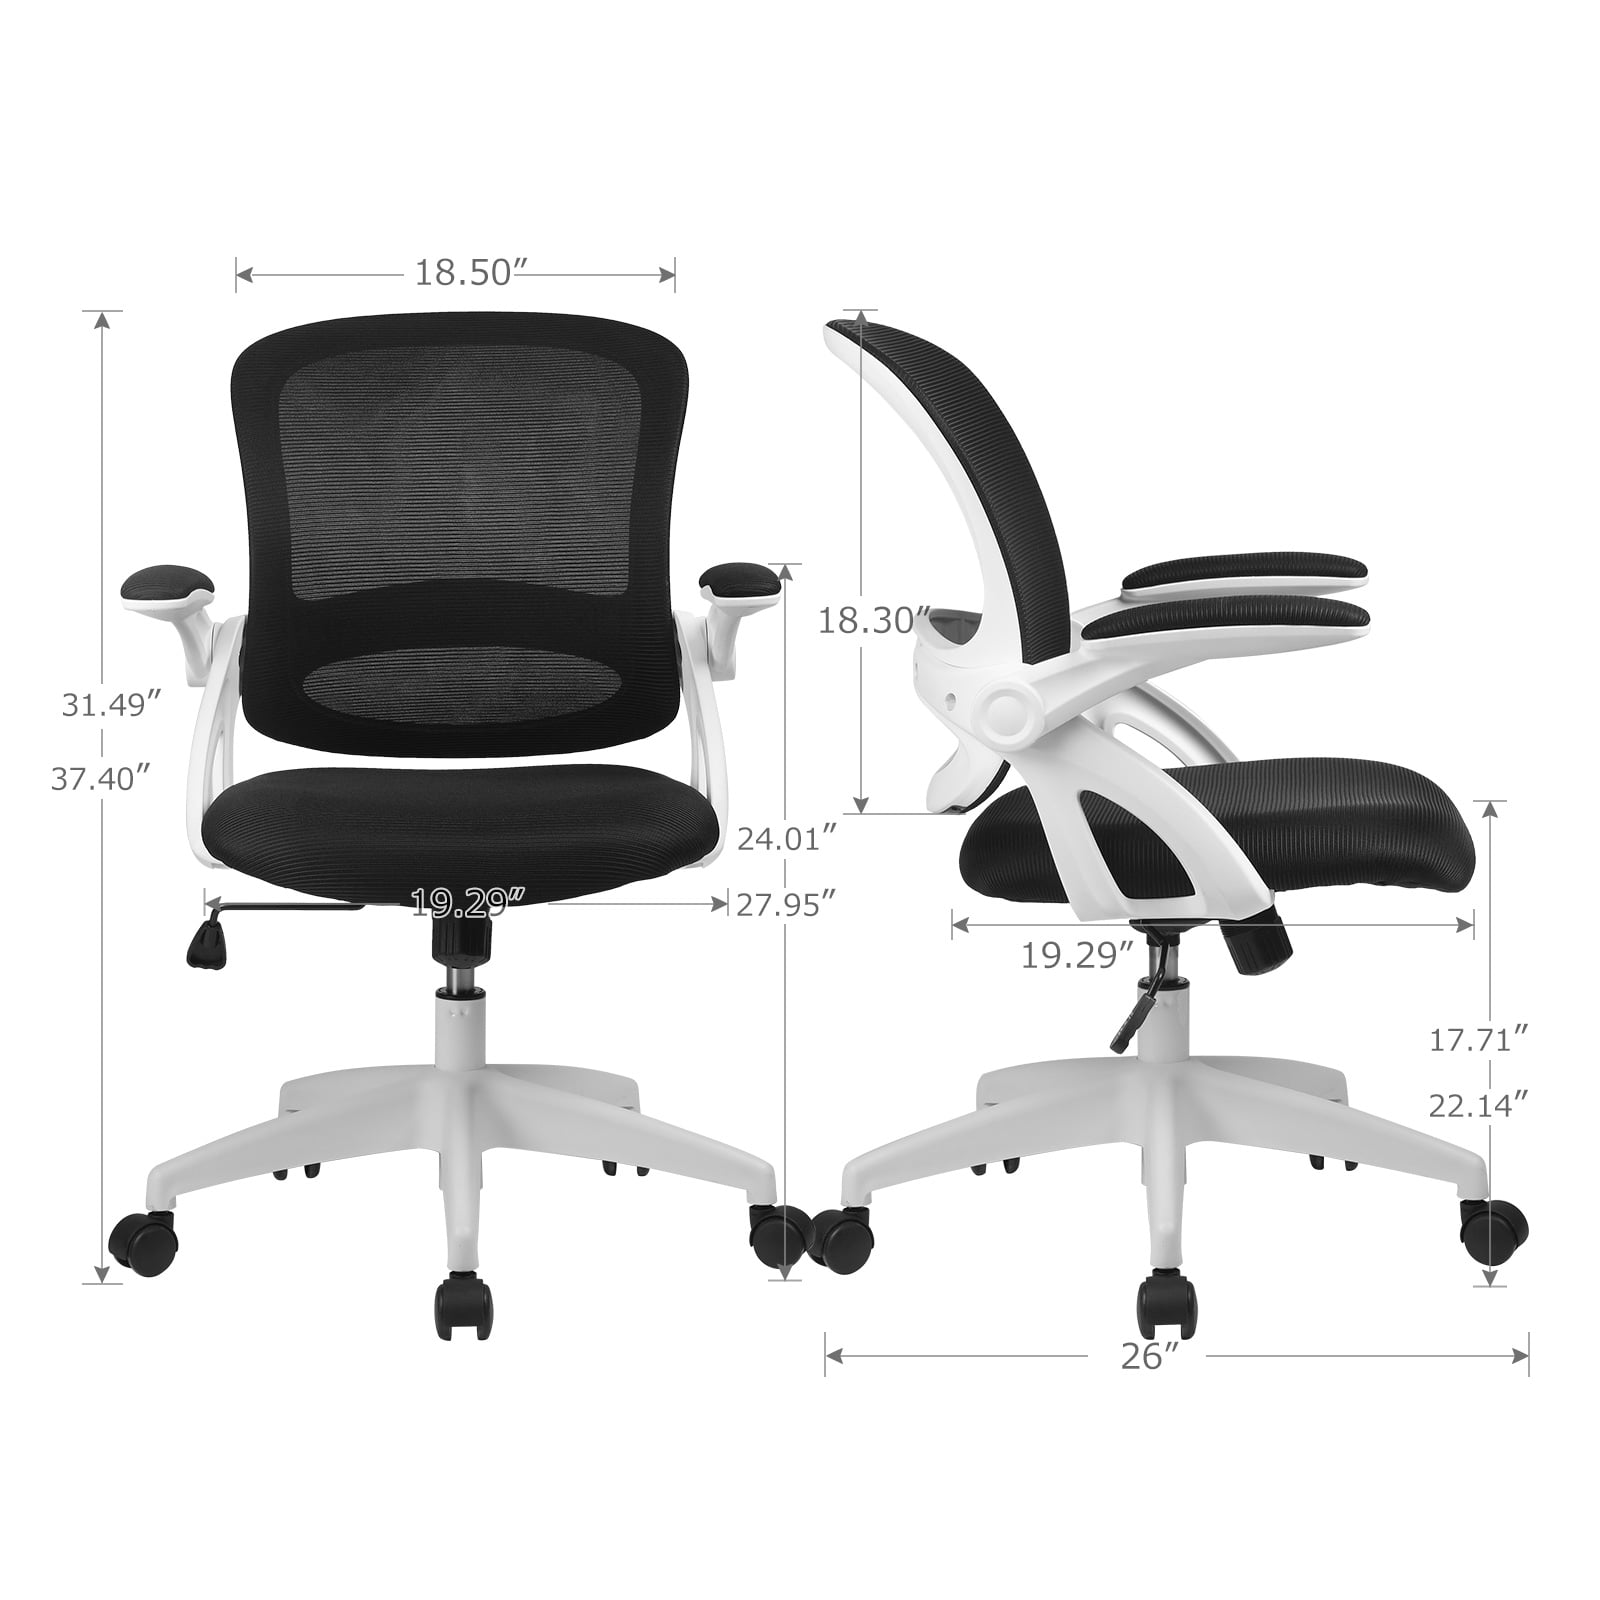 COMHOMA Office Chair Desk Ergonomic Chair with Flip-up Armrest Back Support Mesh Chair for Home Office White 